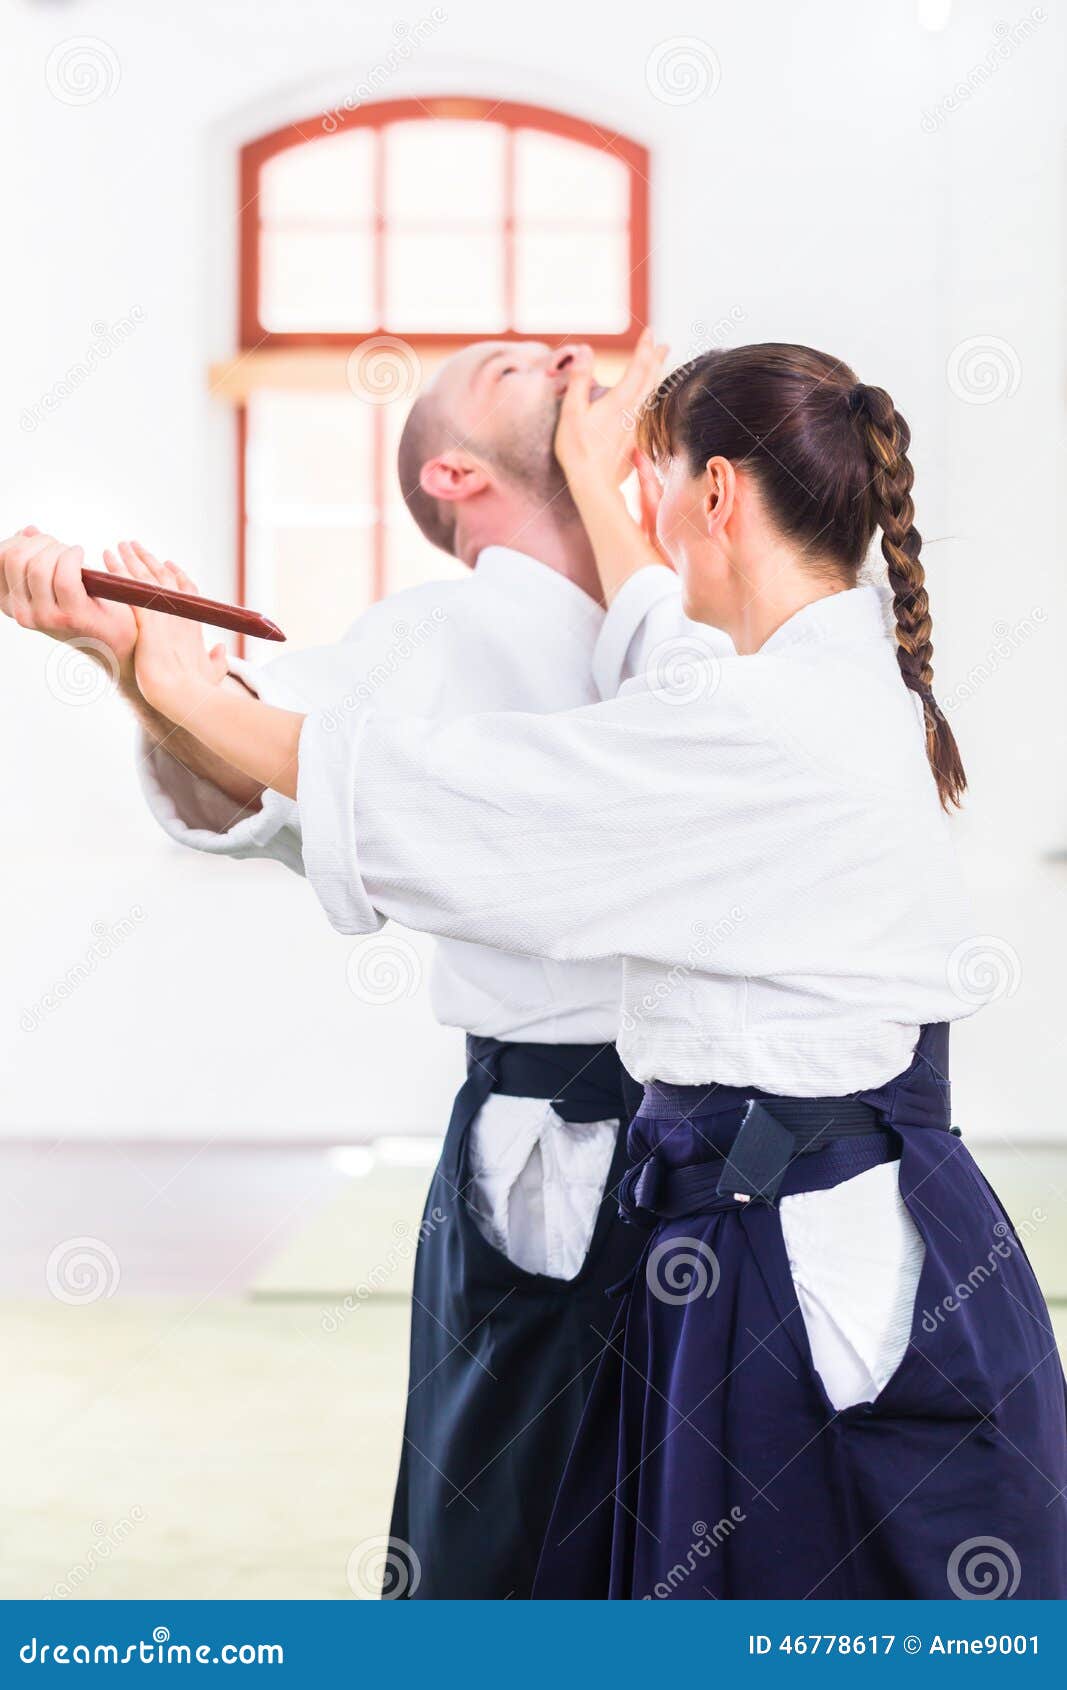 Man and Woman Having Aikido Knife Fight Stock Image - Image of aikido,  wooden: 46778617